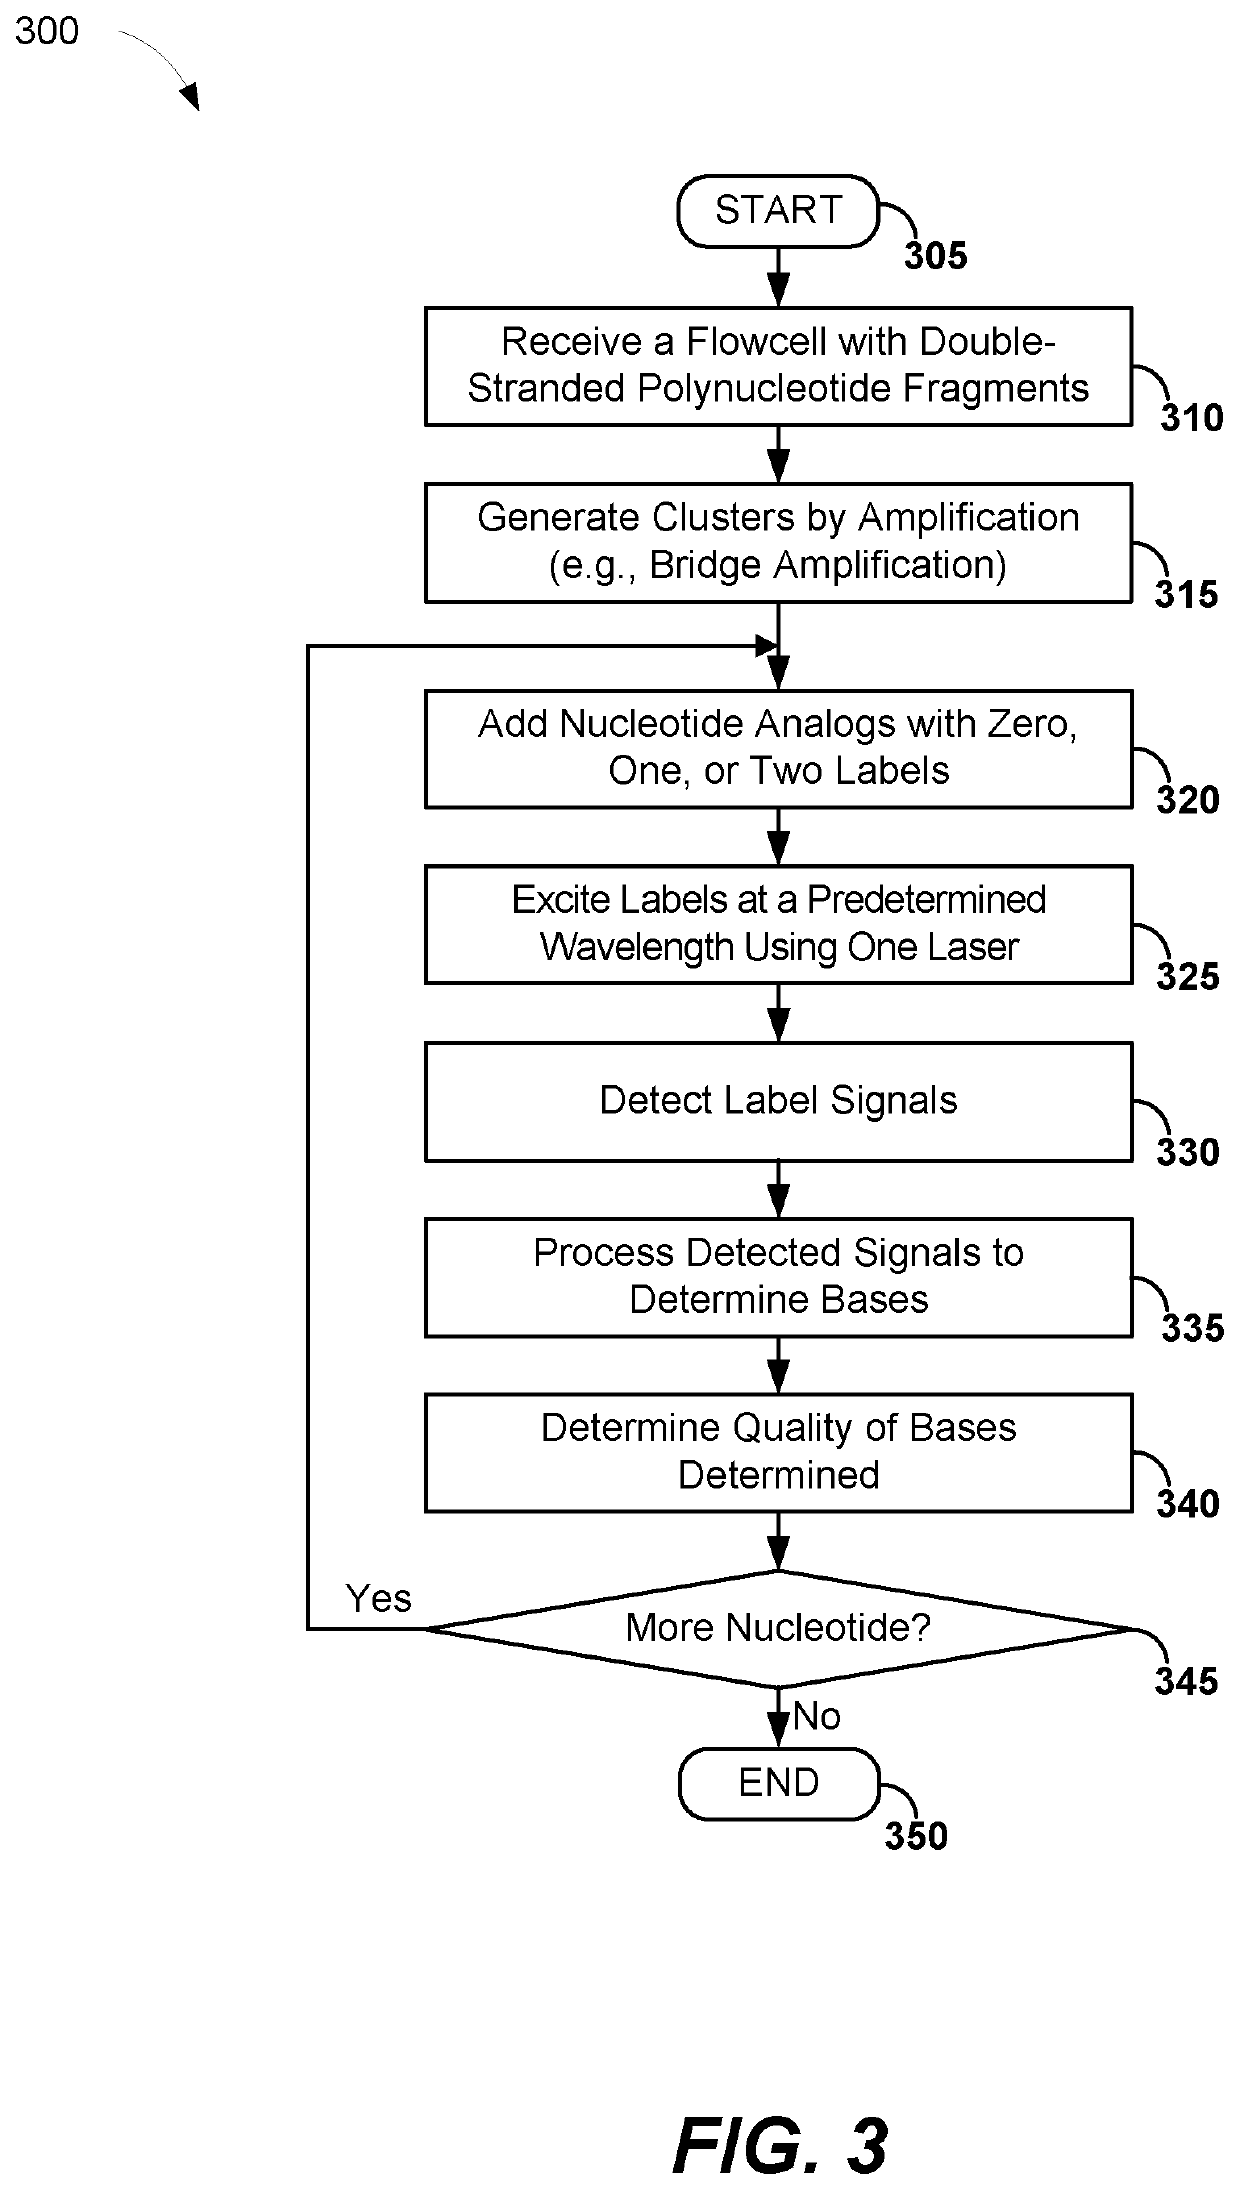 System and method for secondary analysis of nucleotide sequencing data